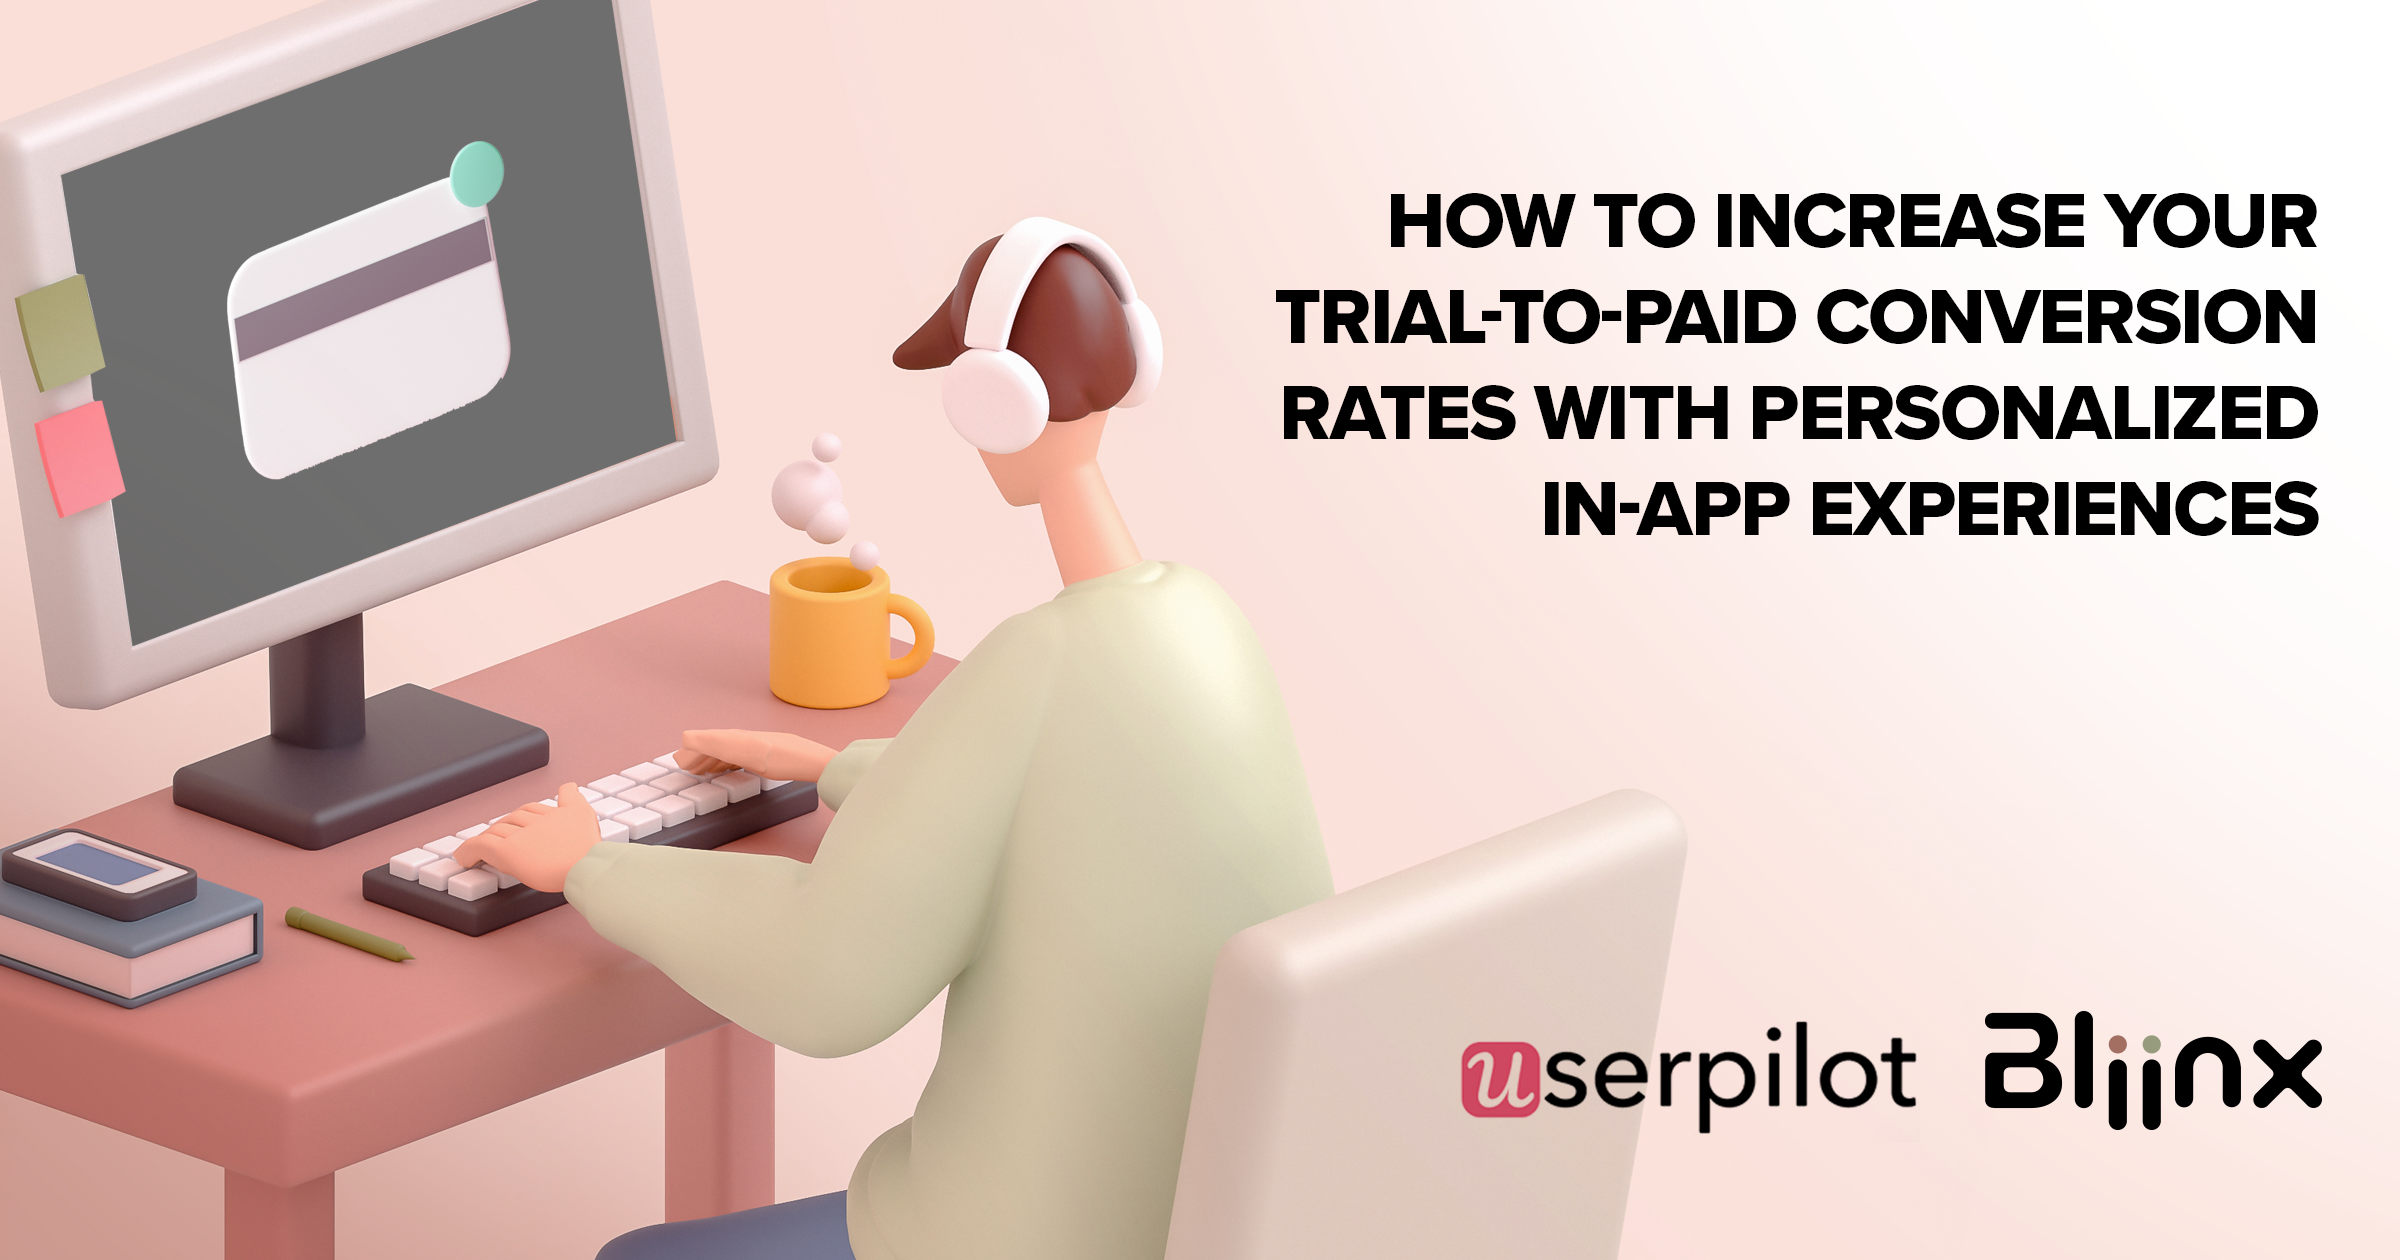 How to increase trial-to-paid conversion rates 